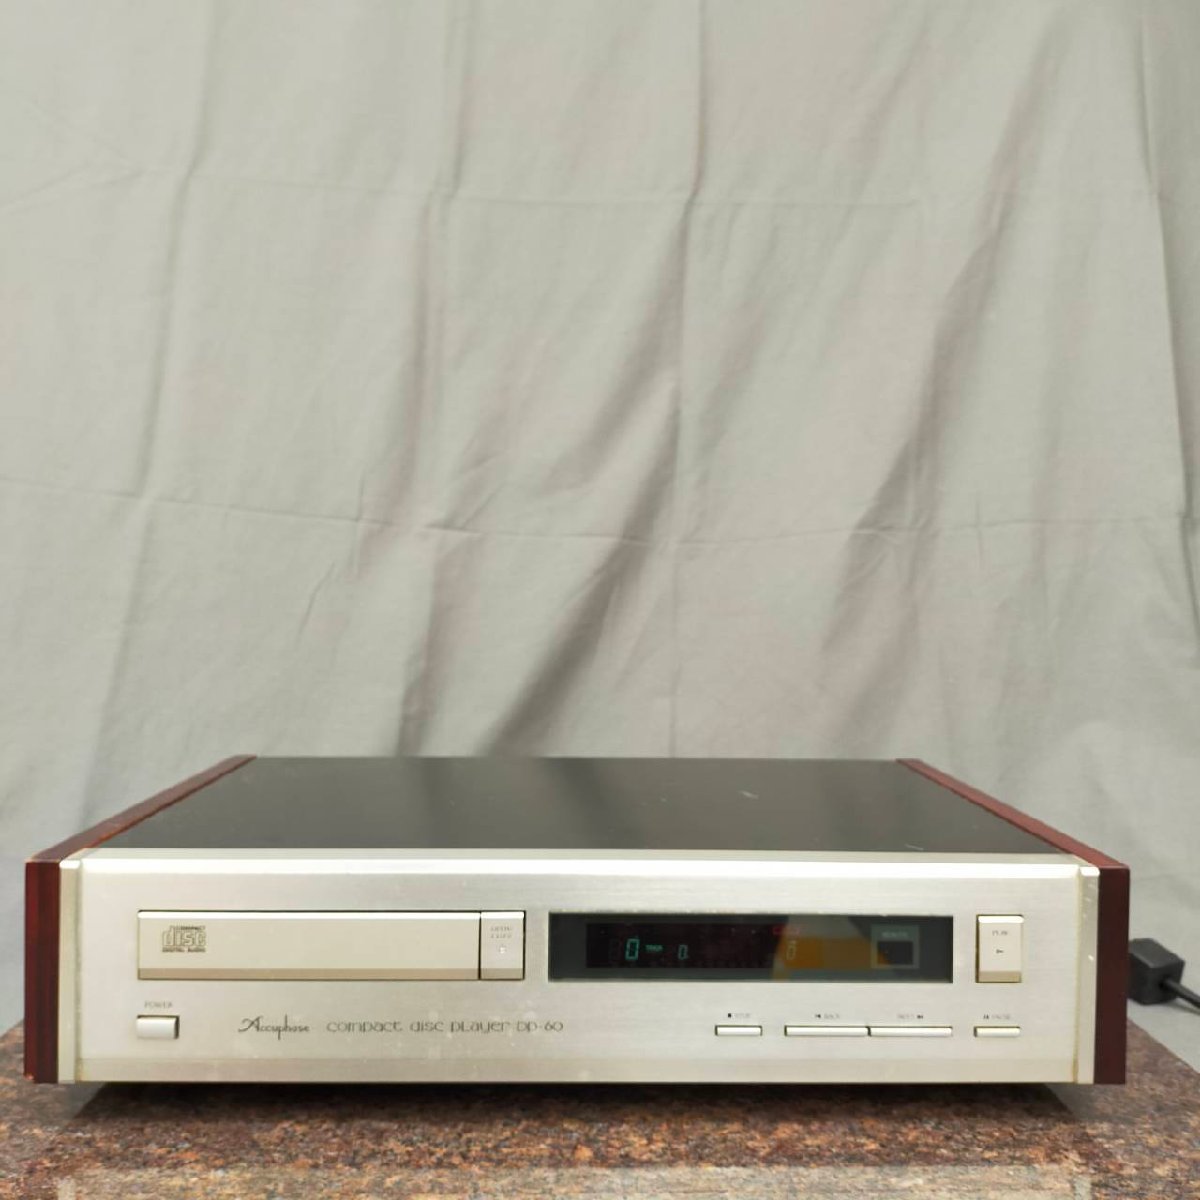 T6148＊【現状品】Accuphase アキュフェーズ DP-60 CDプレイヤー_画像2